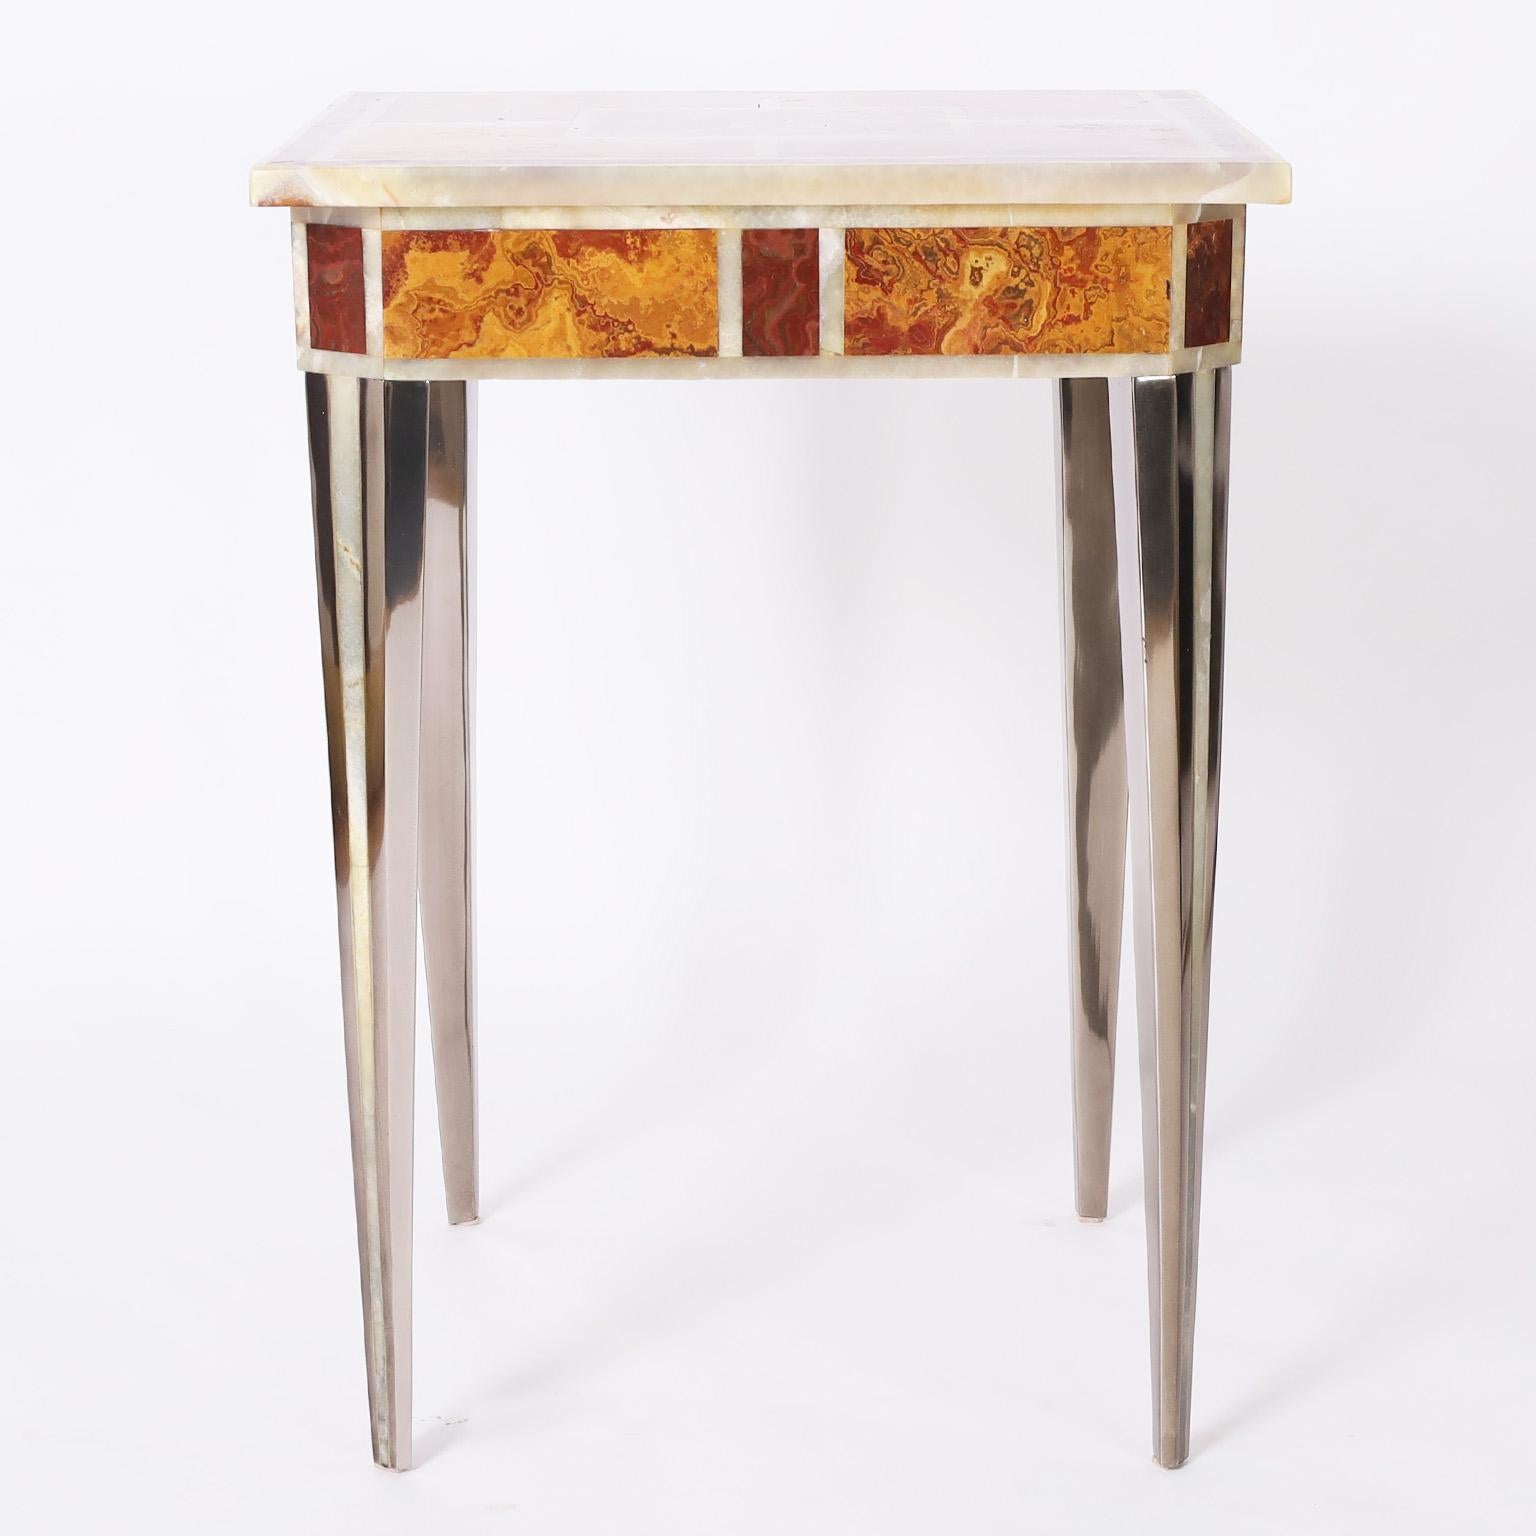 Impressive vintage occasional table having a square top with three types of marble divided by onyx borders. The elegant tapered metal legs have an onyx stripe.